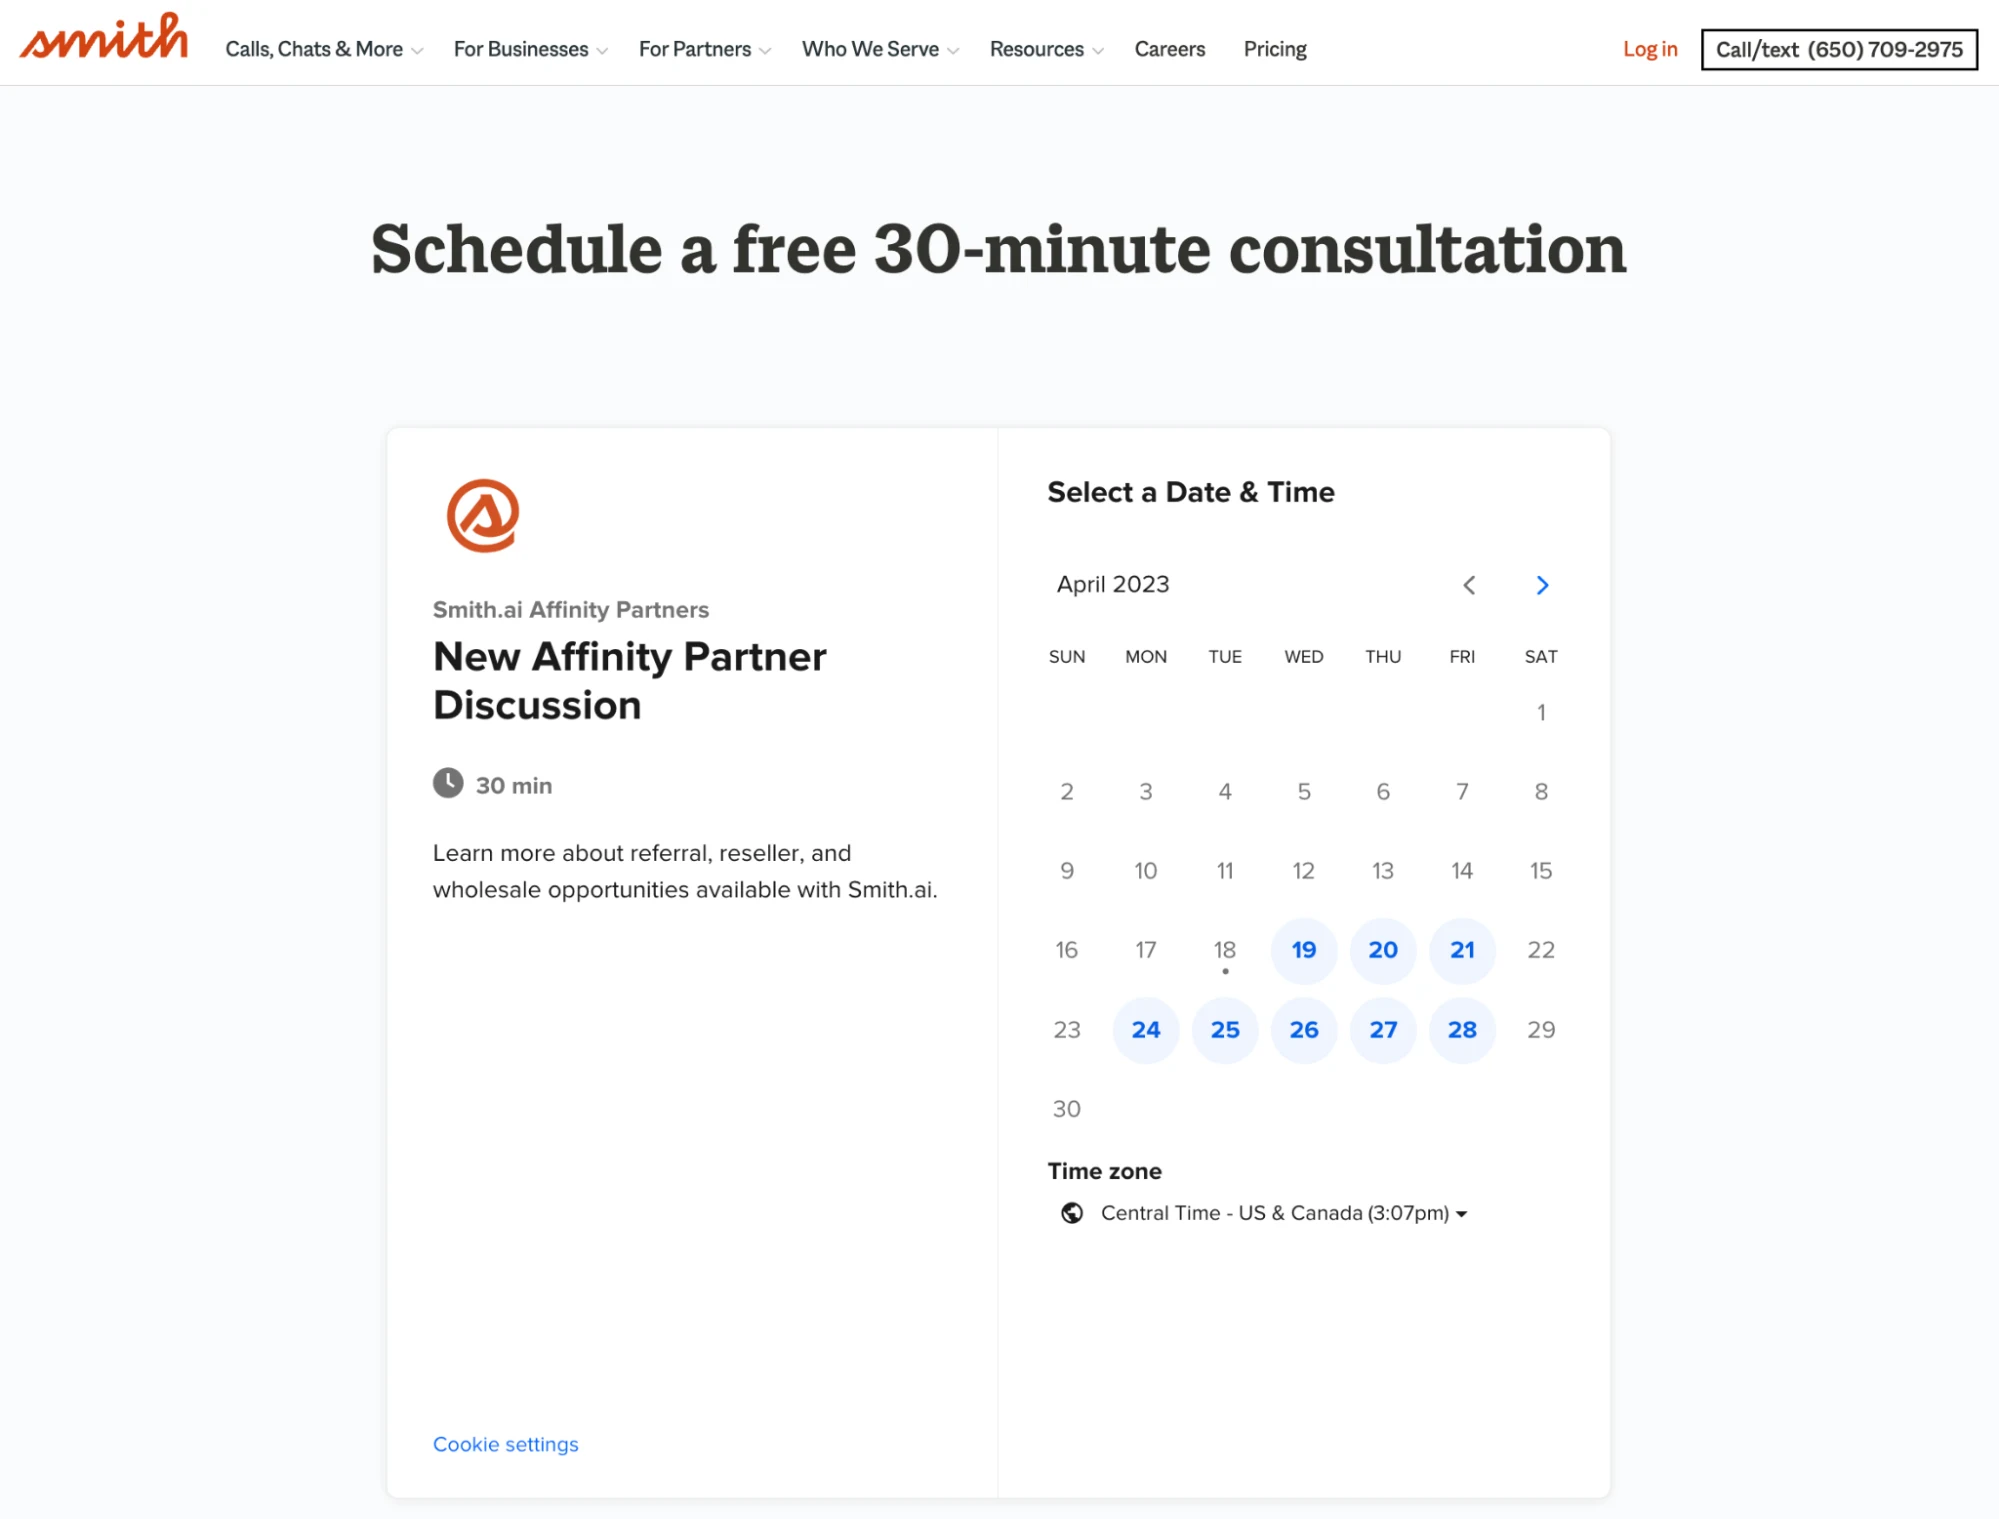 Screenshot of "Schedule a free 30-minute consultation" page on the Smith.ai website. A Calendly booking page for a "Smith.ai Consultation" event with the "Smith.ai Sales Team" is embedded on the page.